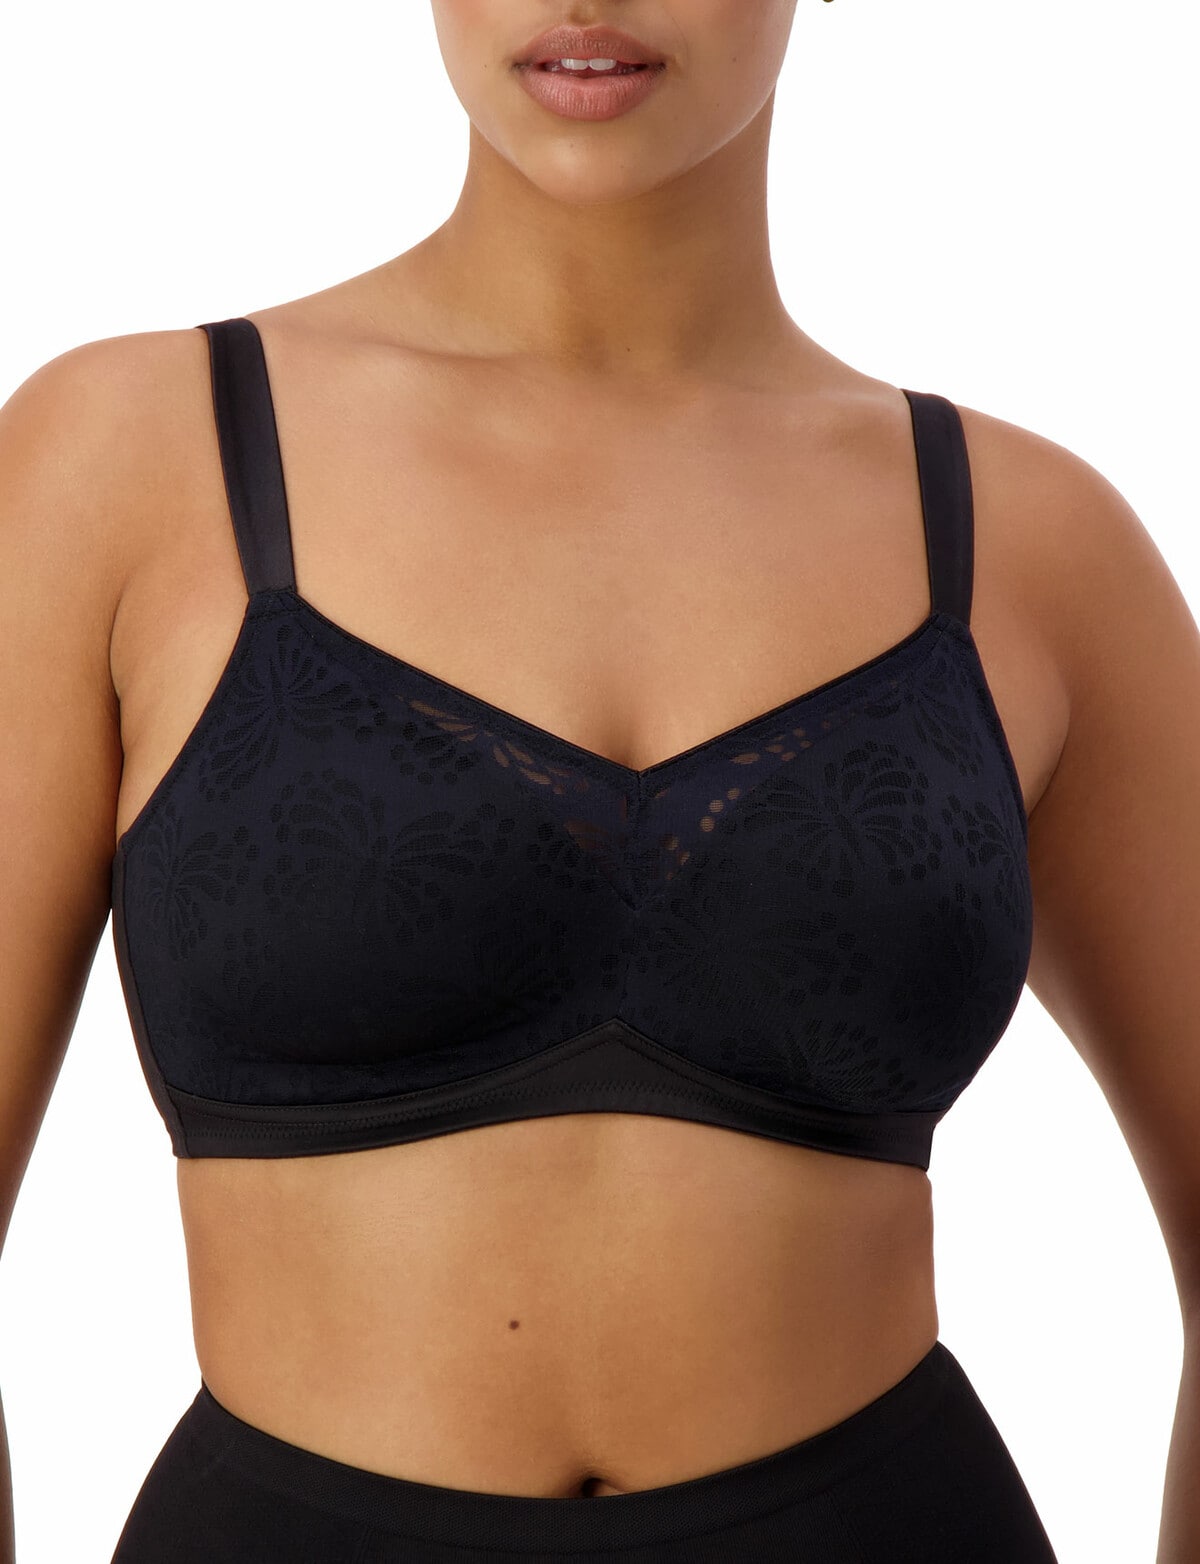 Bendon - Comfit collection . Wire free bra. 12F/G on Designer